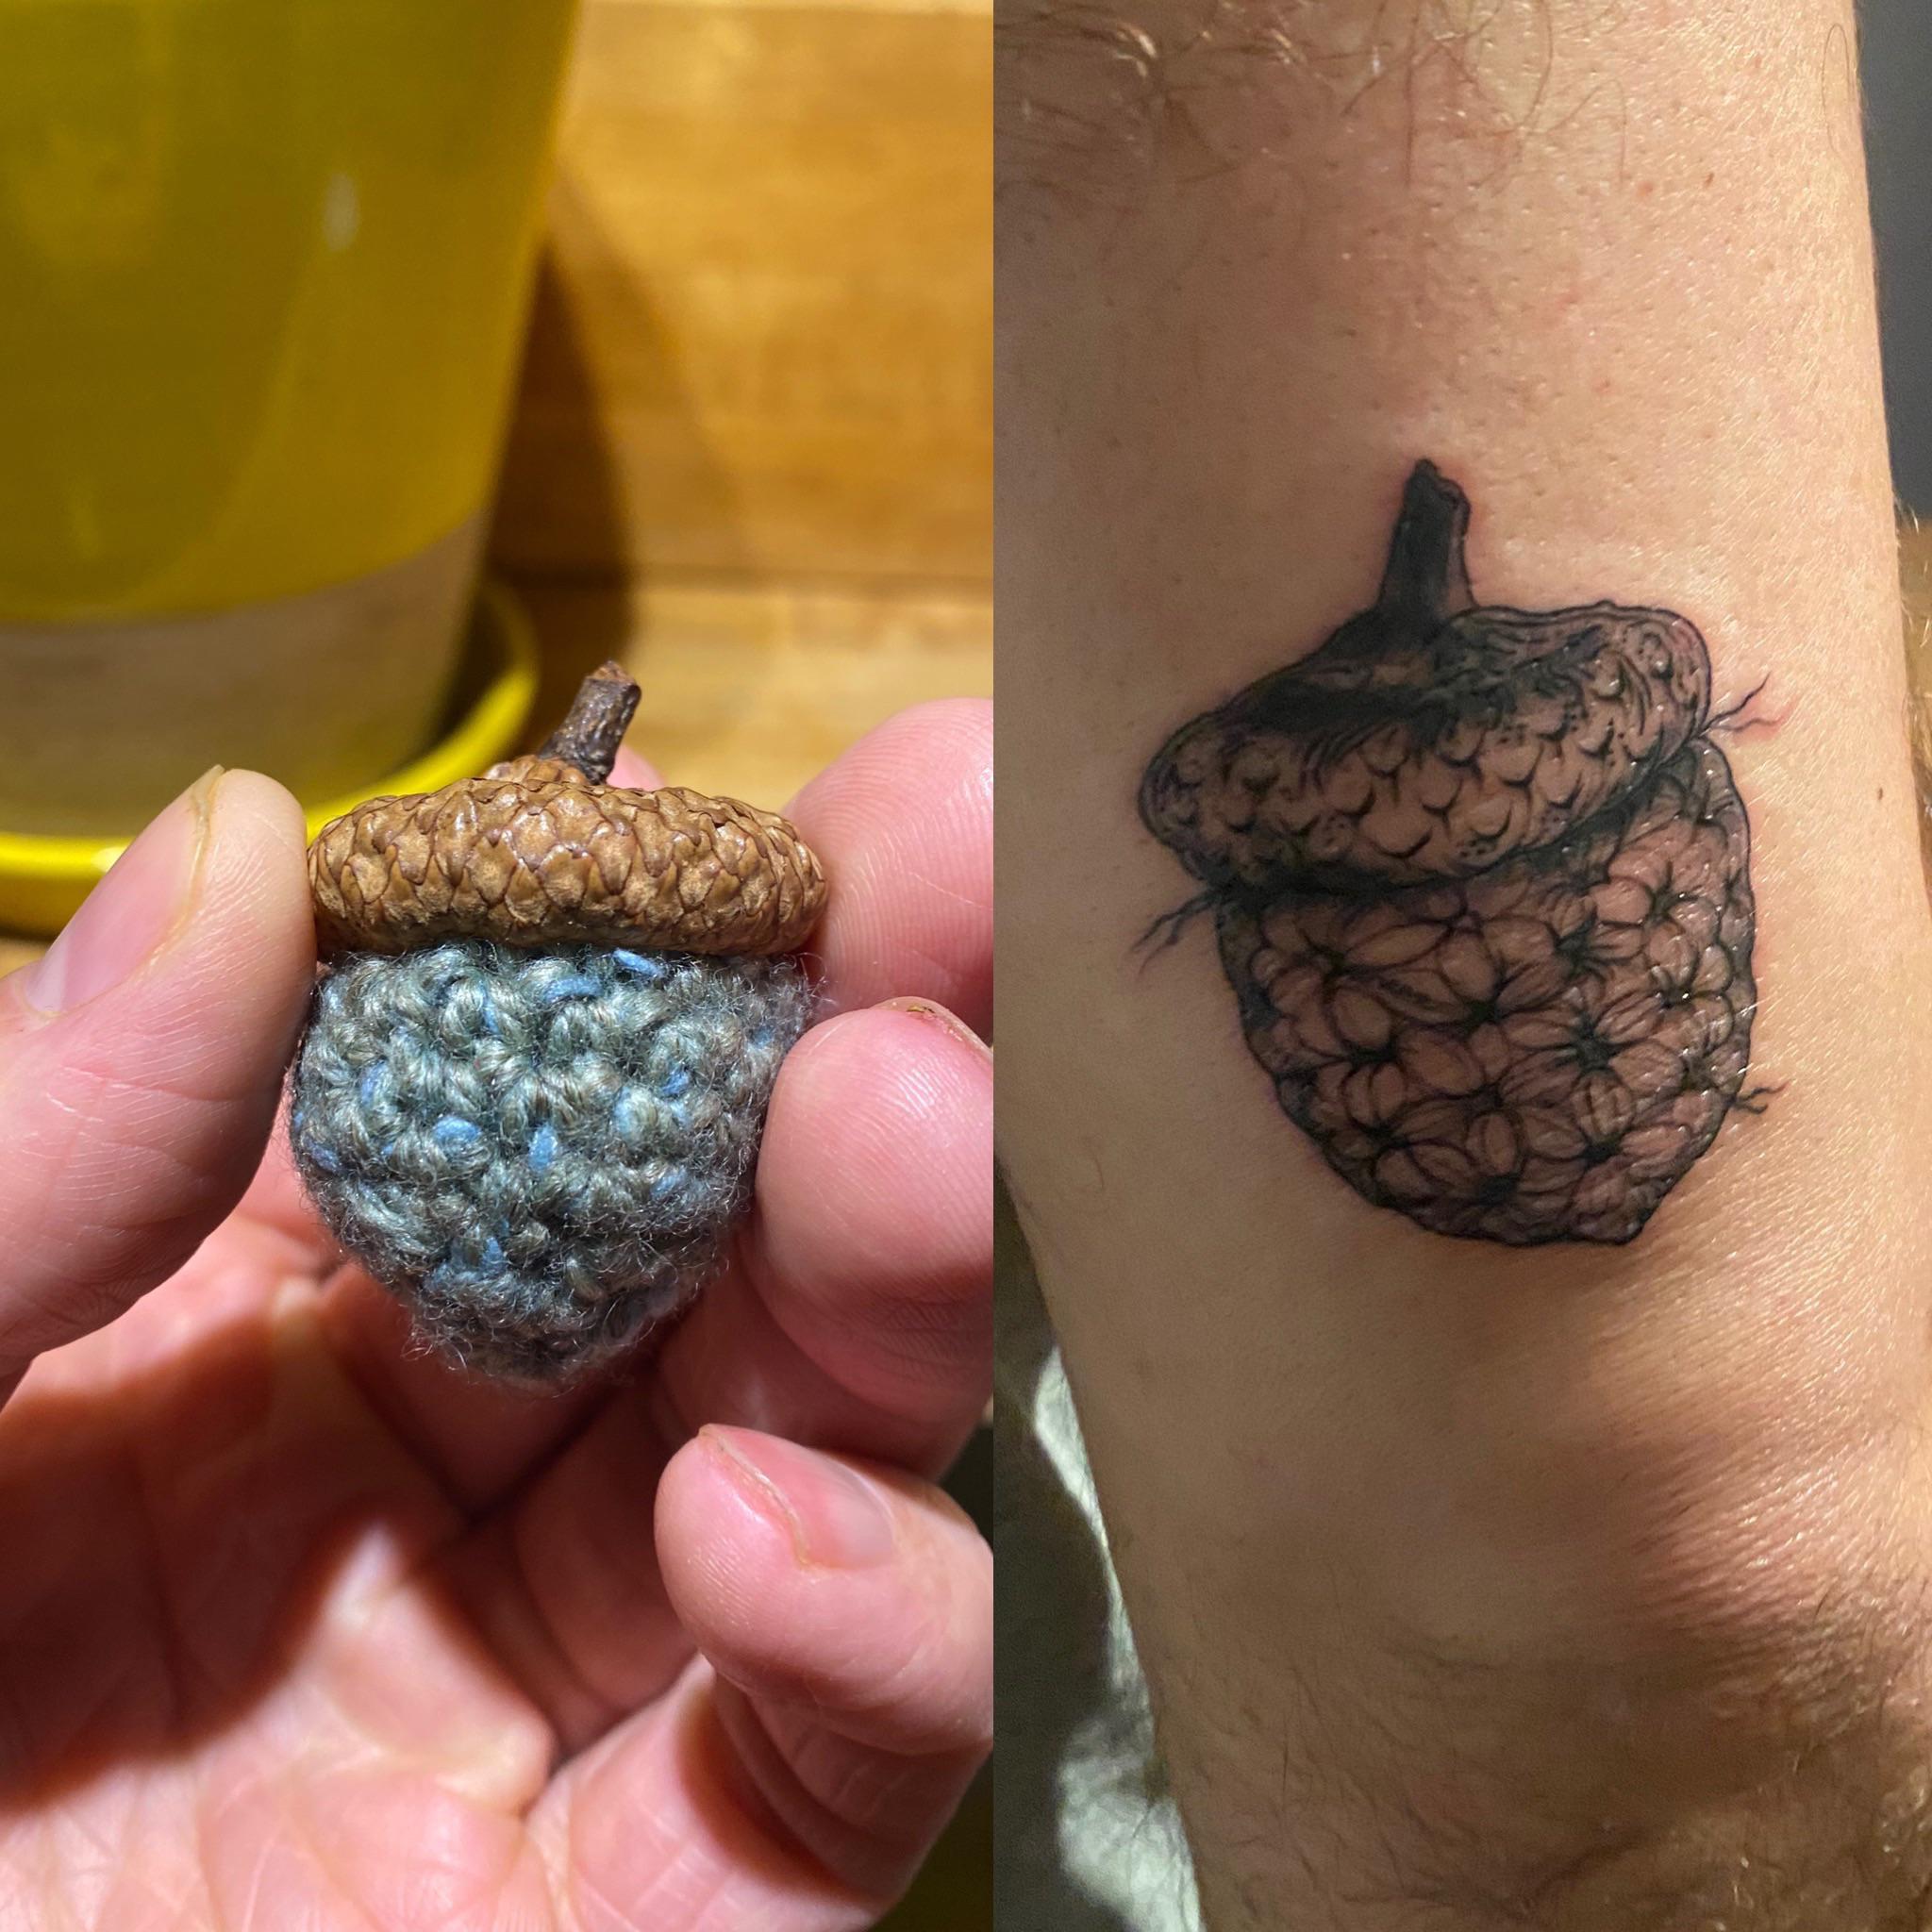 Acorn Tattoo Meaning: Exploring the Rich Meanings Infused into Body Ink